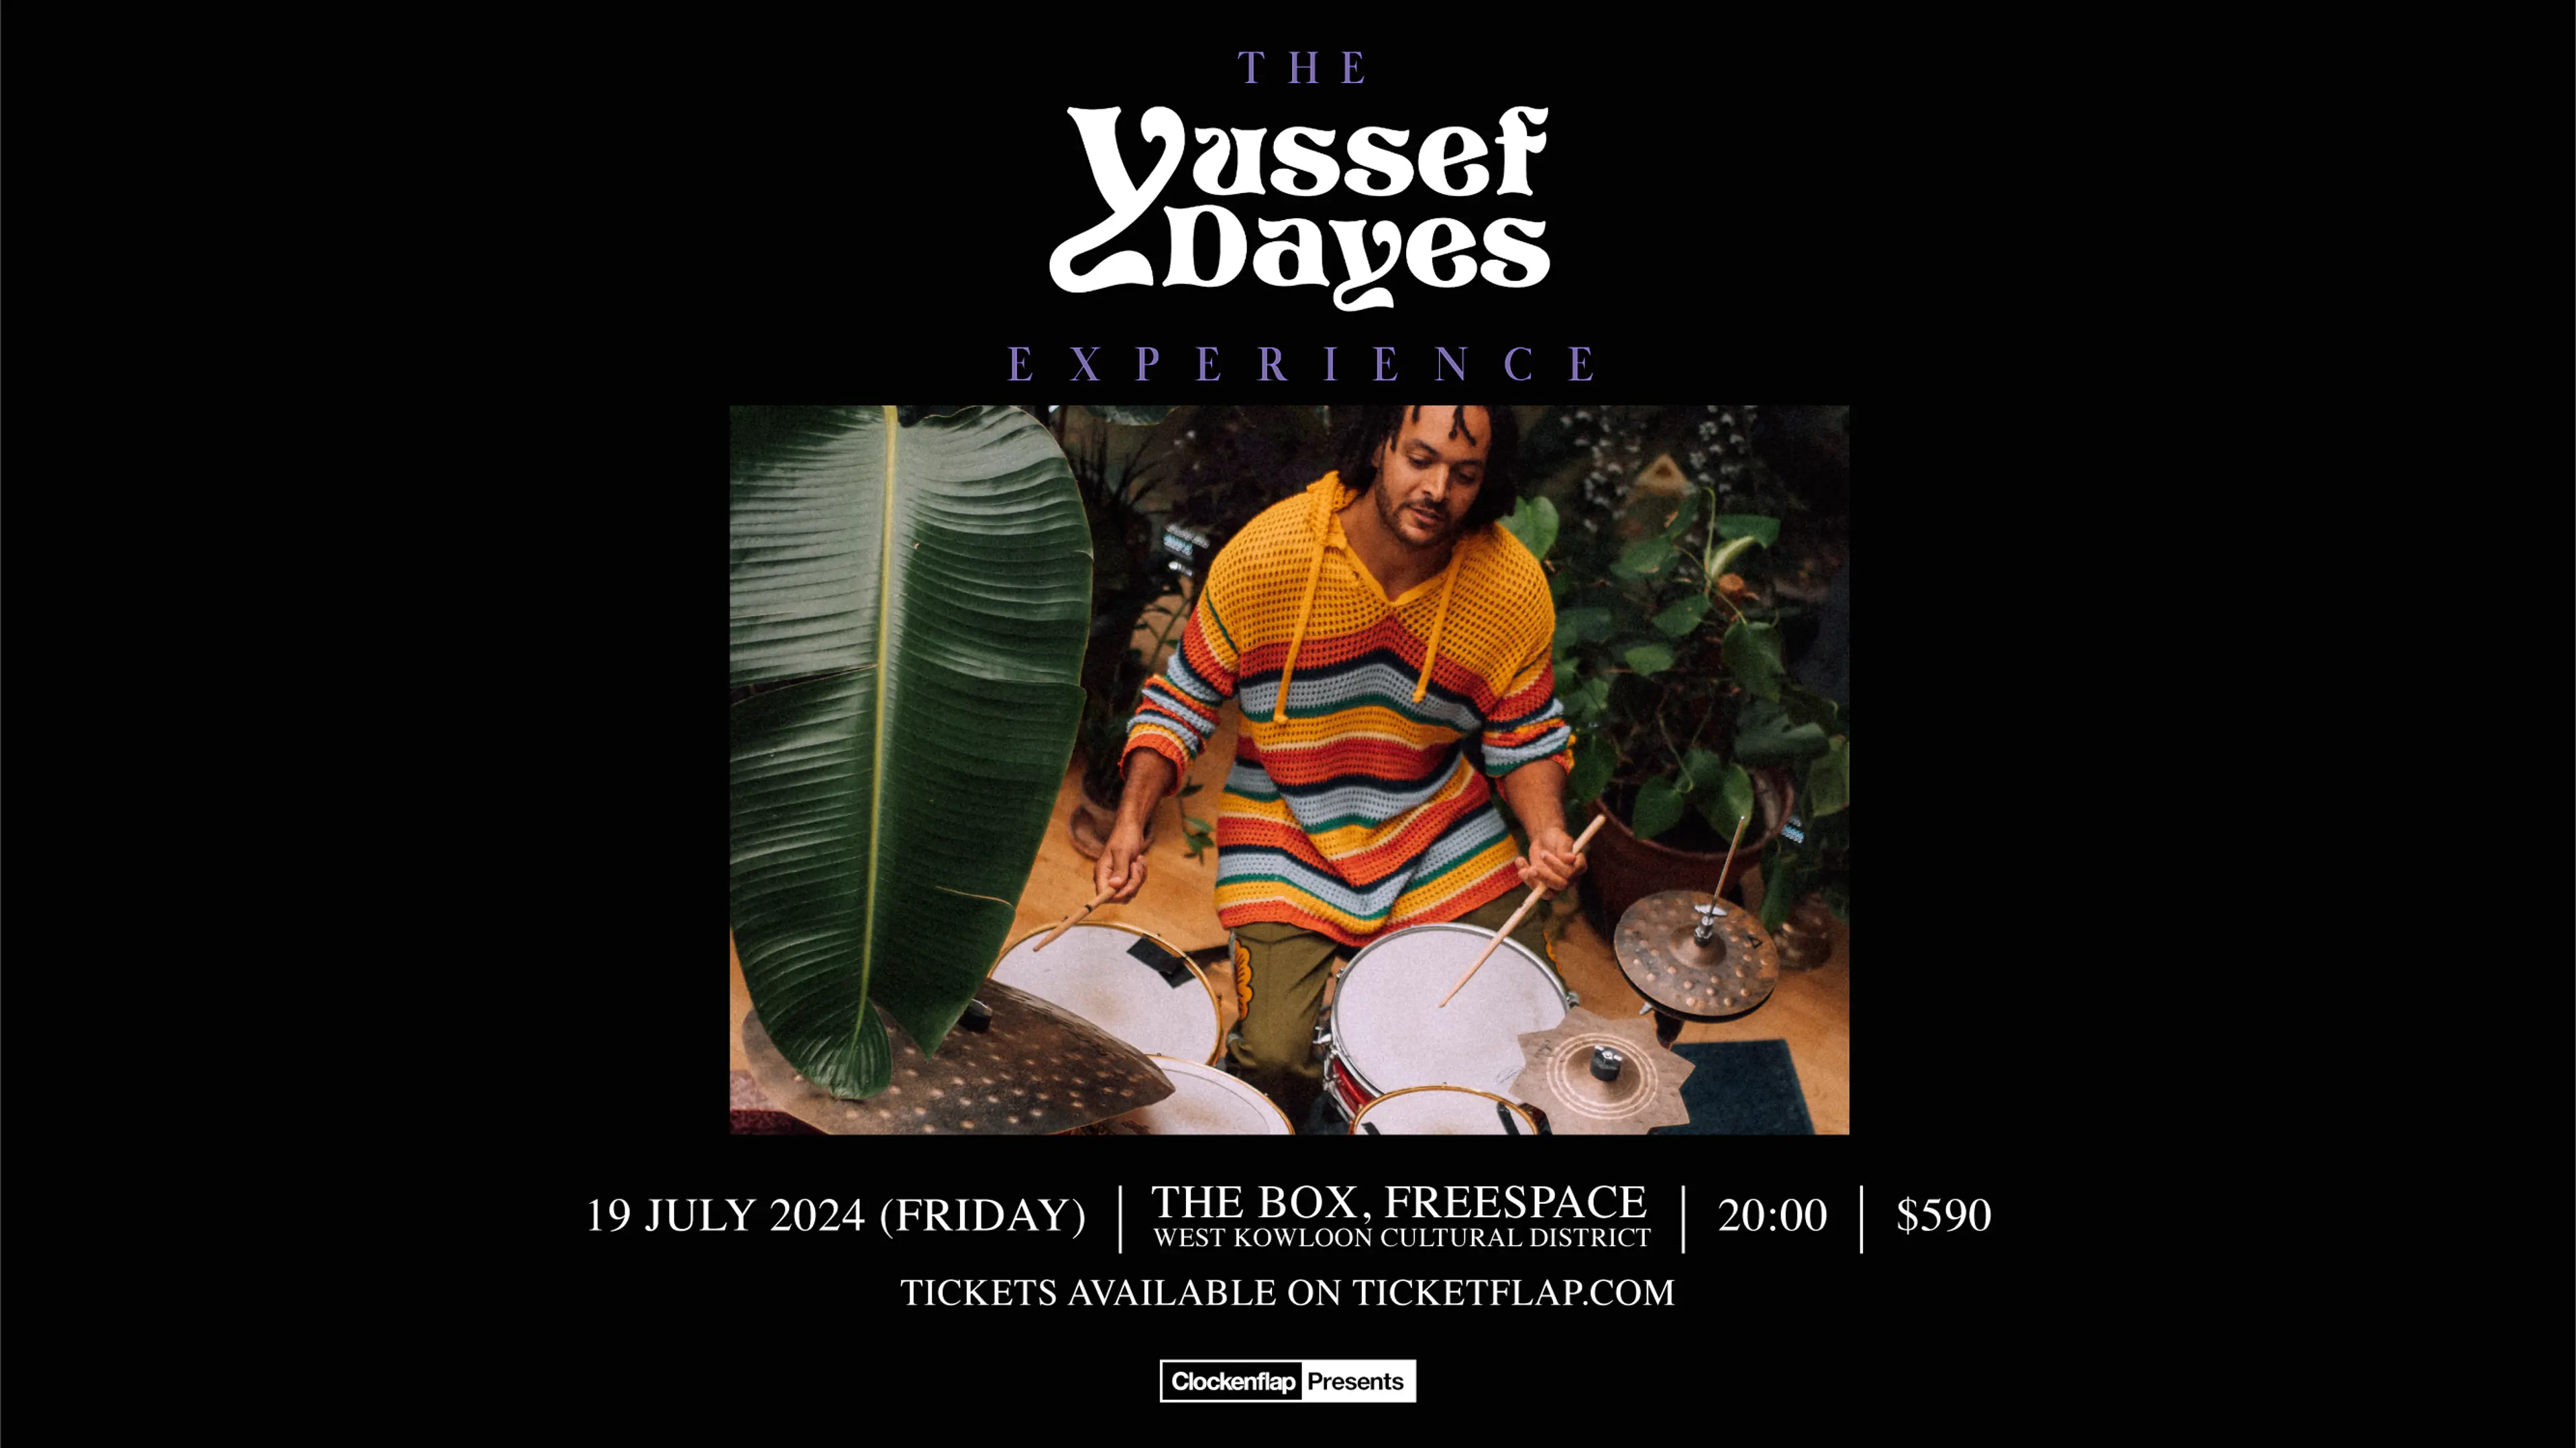 The Yussef Dayes Experience, 19 Jul 2024